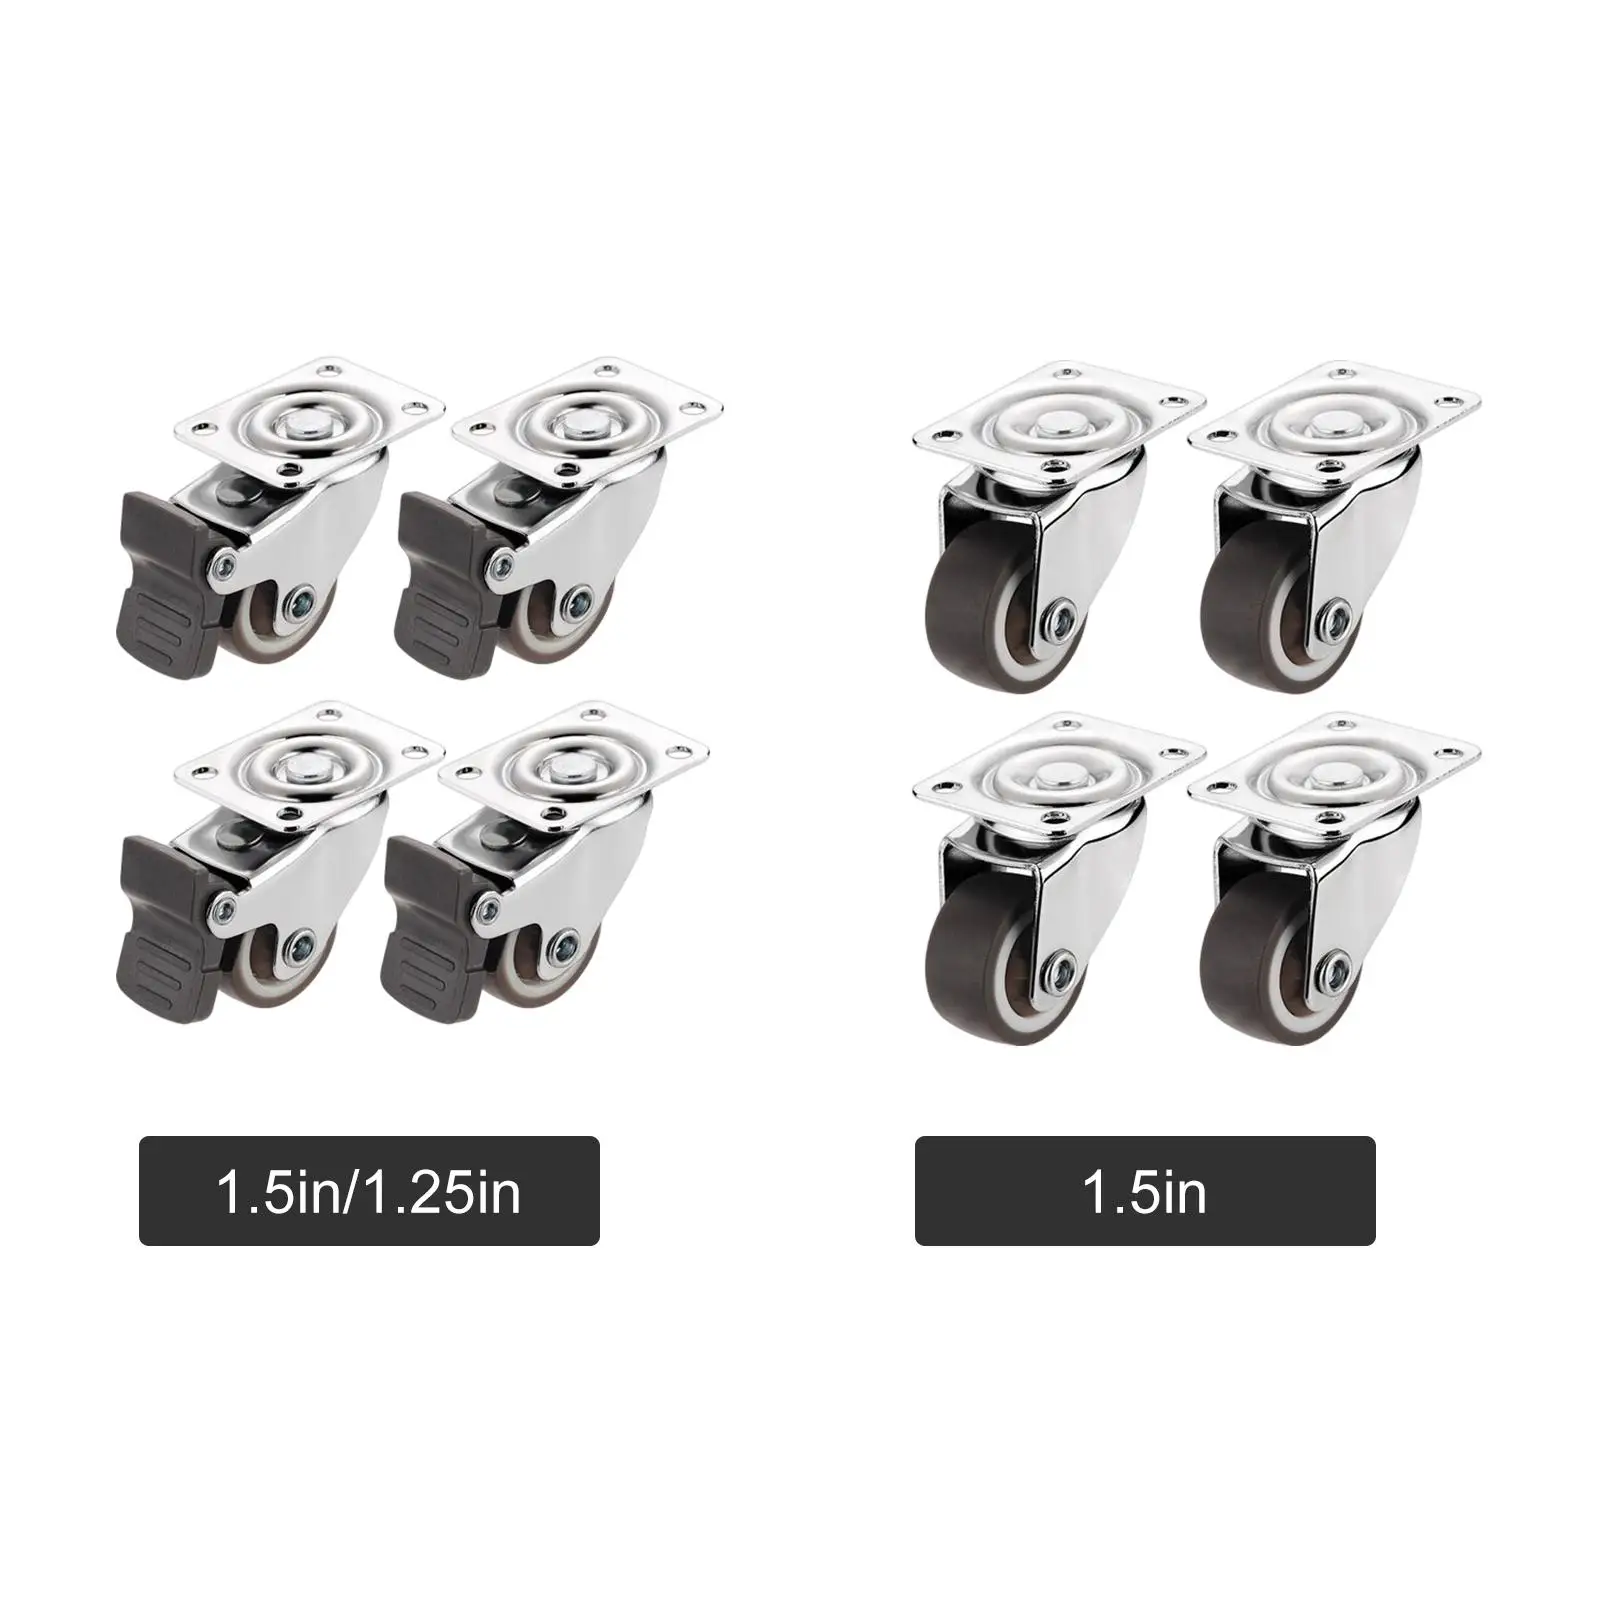 4Pcs Swivel Caster Trolley Furniture Caster Universal Wheel Roller Wheel for Chair Cabinet Table Workbench Cart